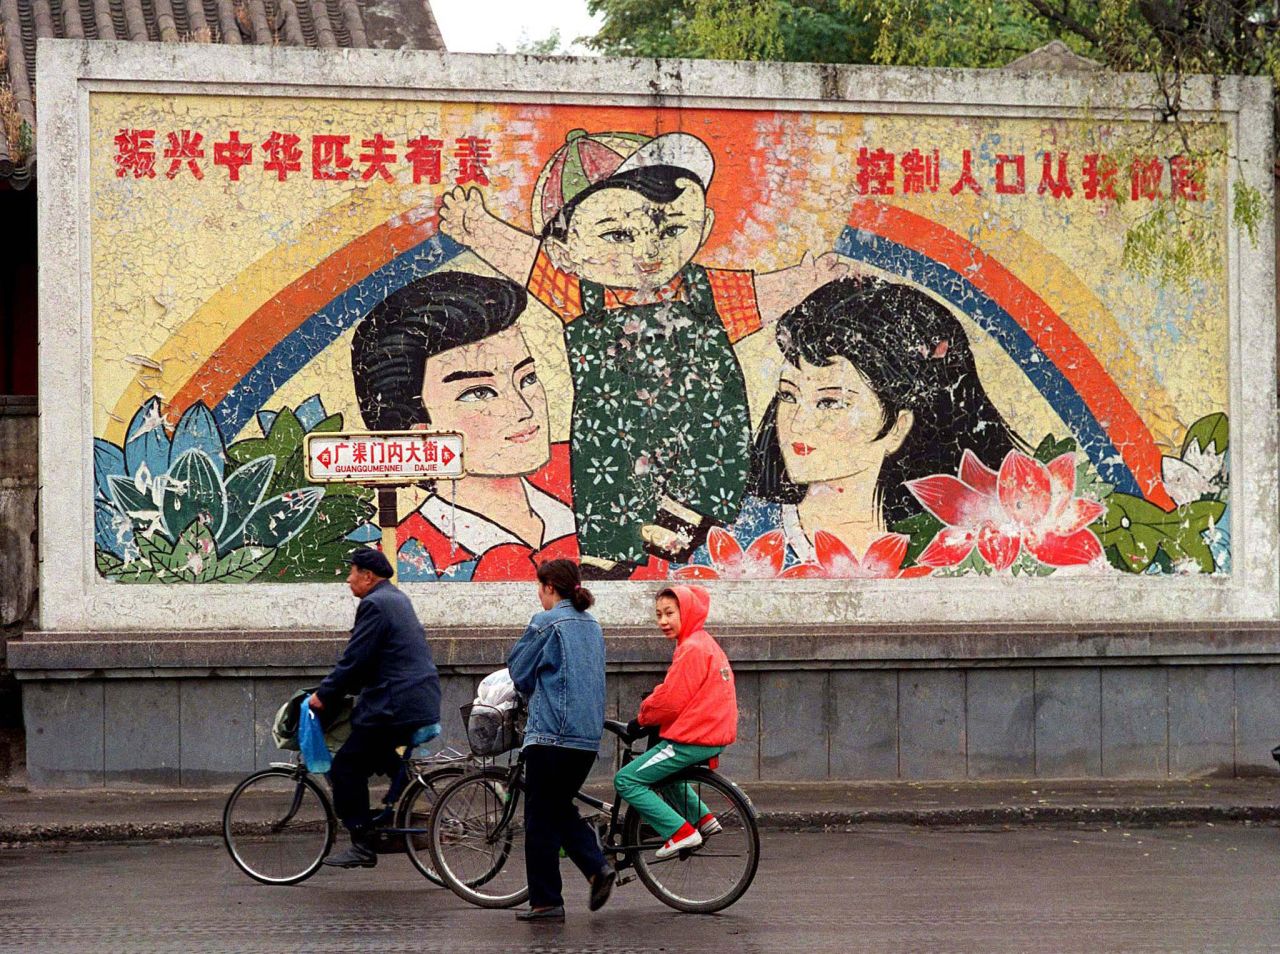 A decaying mural promoting China's one-child family policy is seen on a street in Beijing in 1996. The one-child policy was introduced in 1979 when the government feared a rapid increase in population size after the baby boom of the 1950s and 1960s. The country's fertility rate fell dramatically, from a peak of almost six births for every woman between 1960 and 1965 to 1.5 between 1995 and 2014. In 2015, <a href="https://www.cnn.com/2016/10/13/health/china-one-child-policy-population-growth/index.html" target="_blank">China decided to overturn the decades-old policy</a> and allow couples across the country to have two children. In 2021, the government <a href="https://www.cnn.com/2021/05/31/china/china-three-child-policy-intl-hnk/index.html" target="_blank">announced it would allow couples to have three children,</a> but it's unclear when the new policy will take effect.